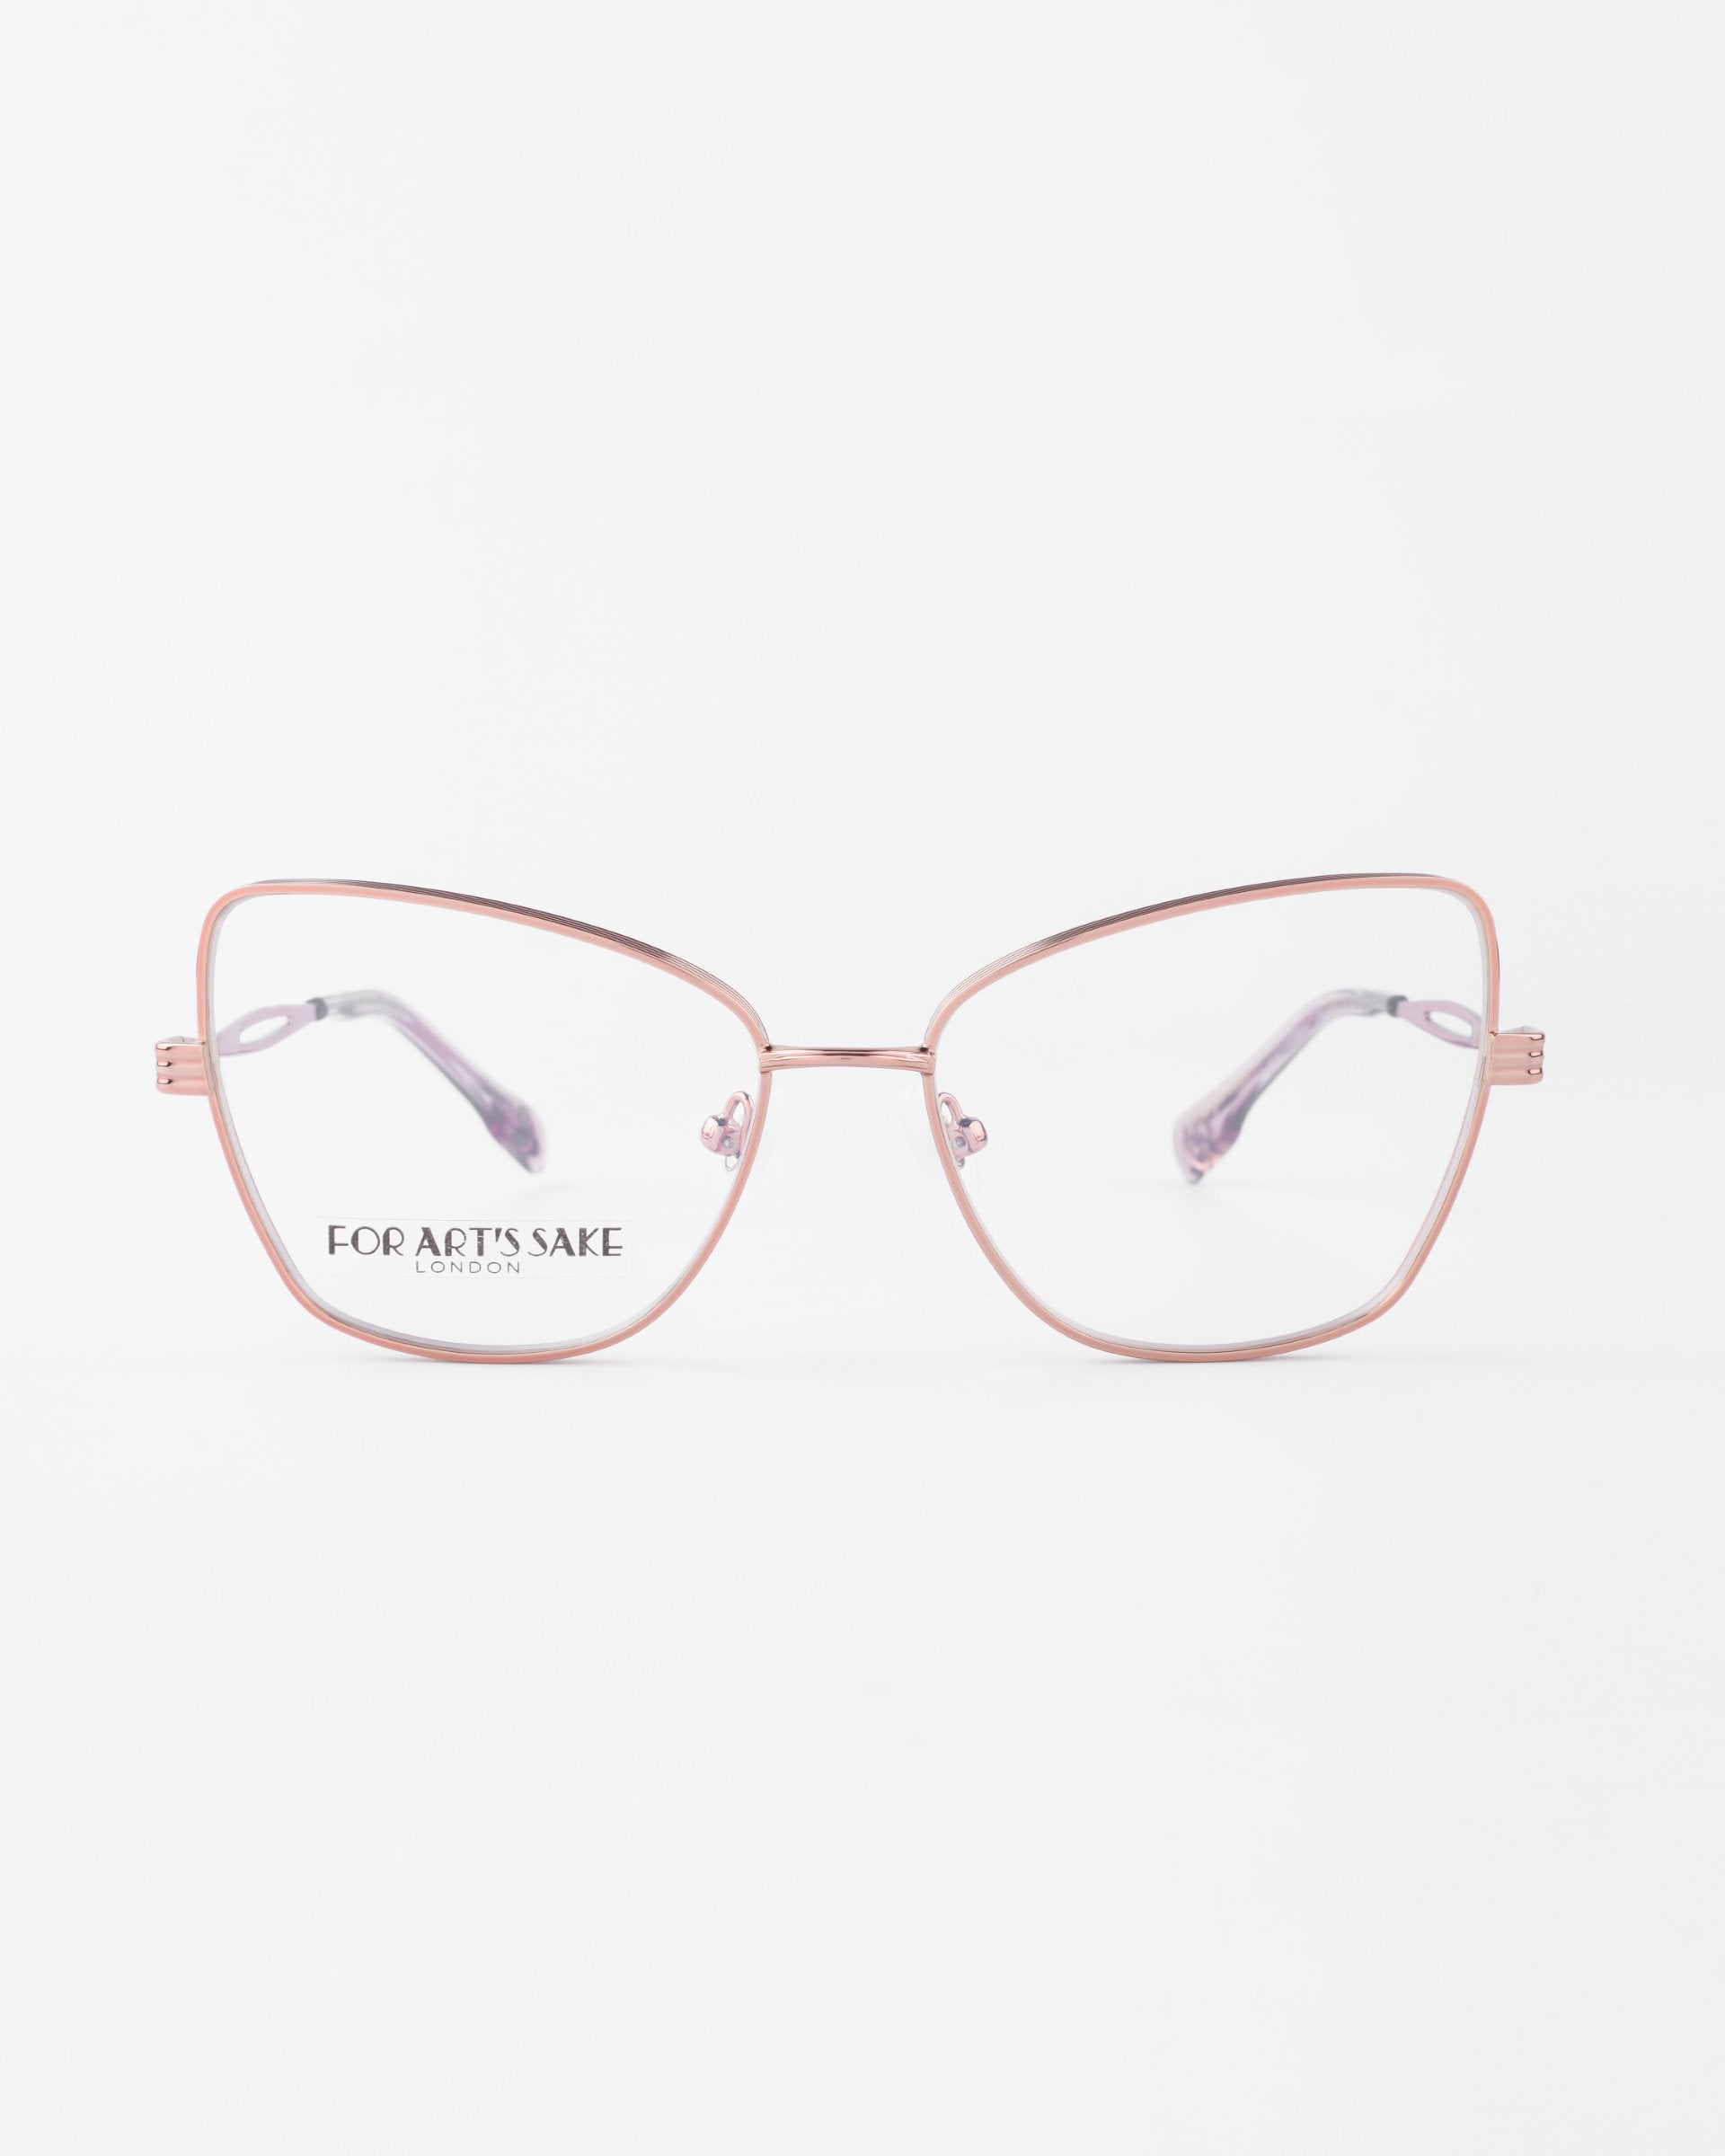 A pair of Lady by For Art's Sake® eyeglasses with rose gold metal frames and clear lenses. The frame features a modern, geometric cat-eye silhouette with subtle design details on the temples, set against a plain white background.